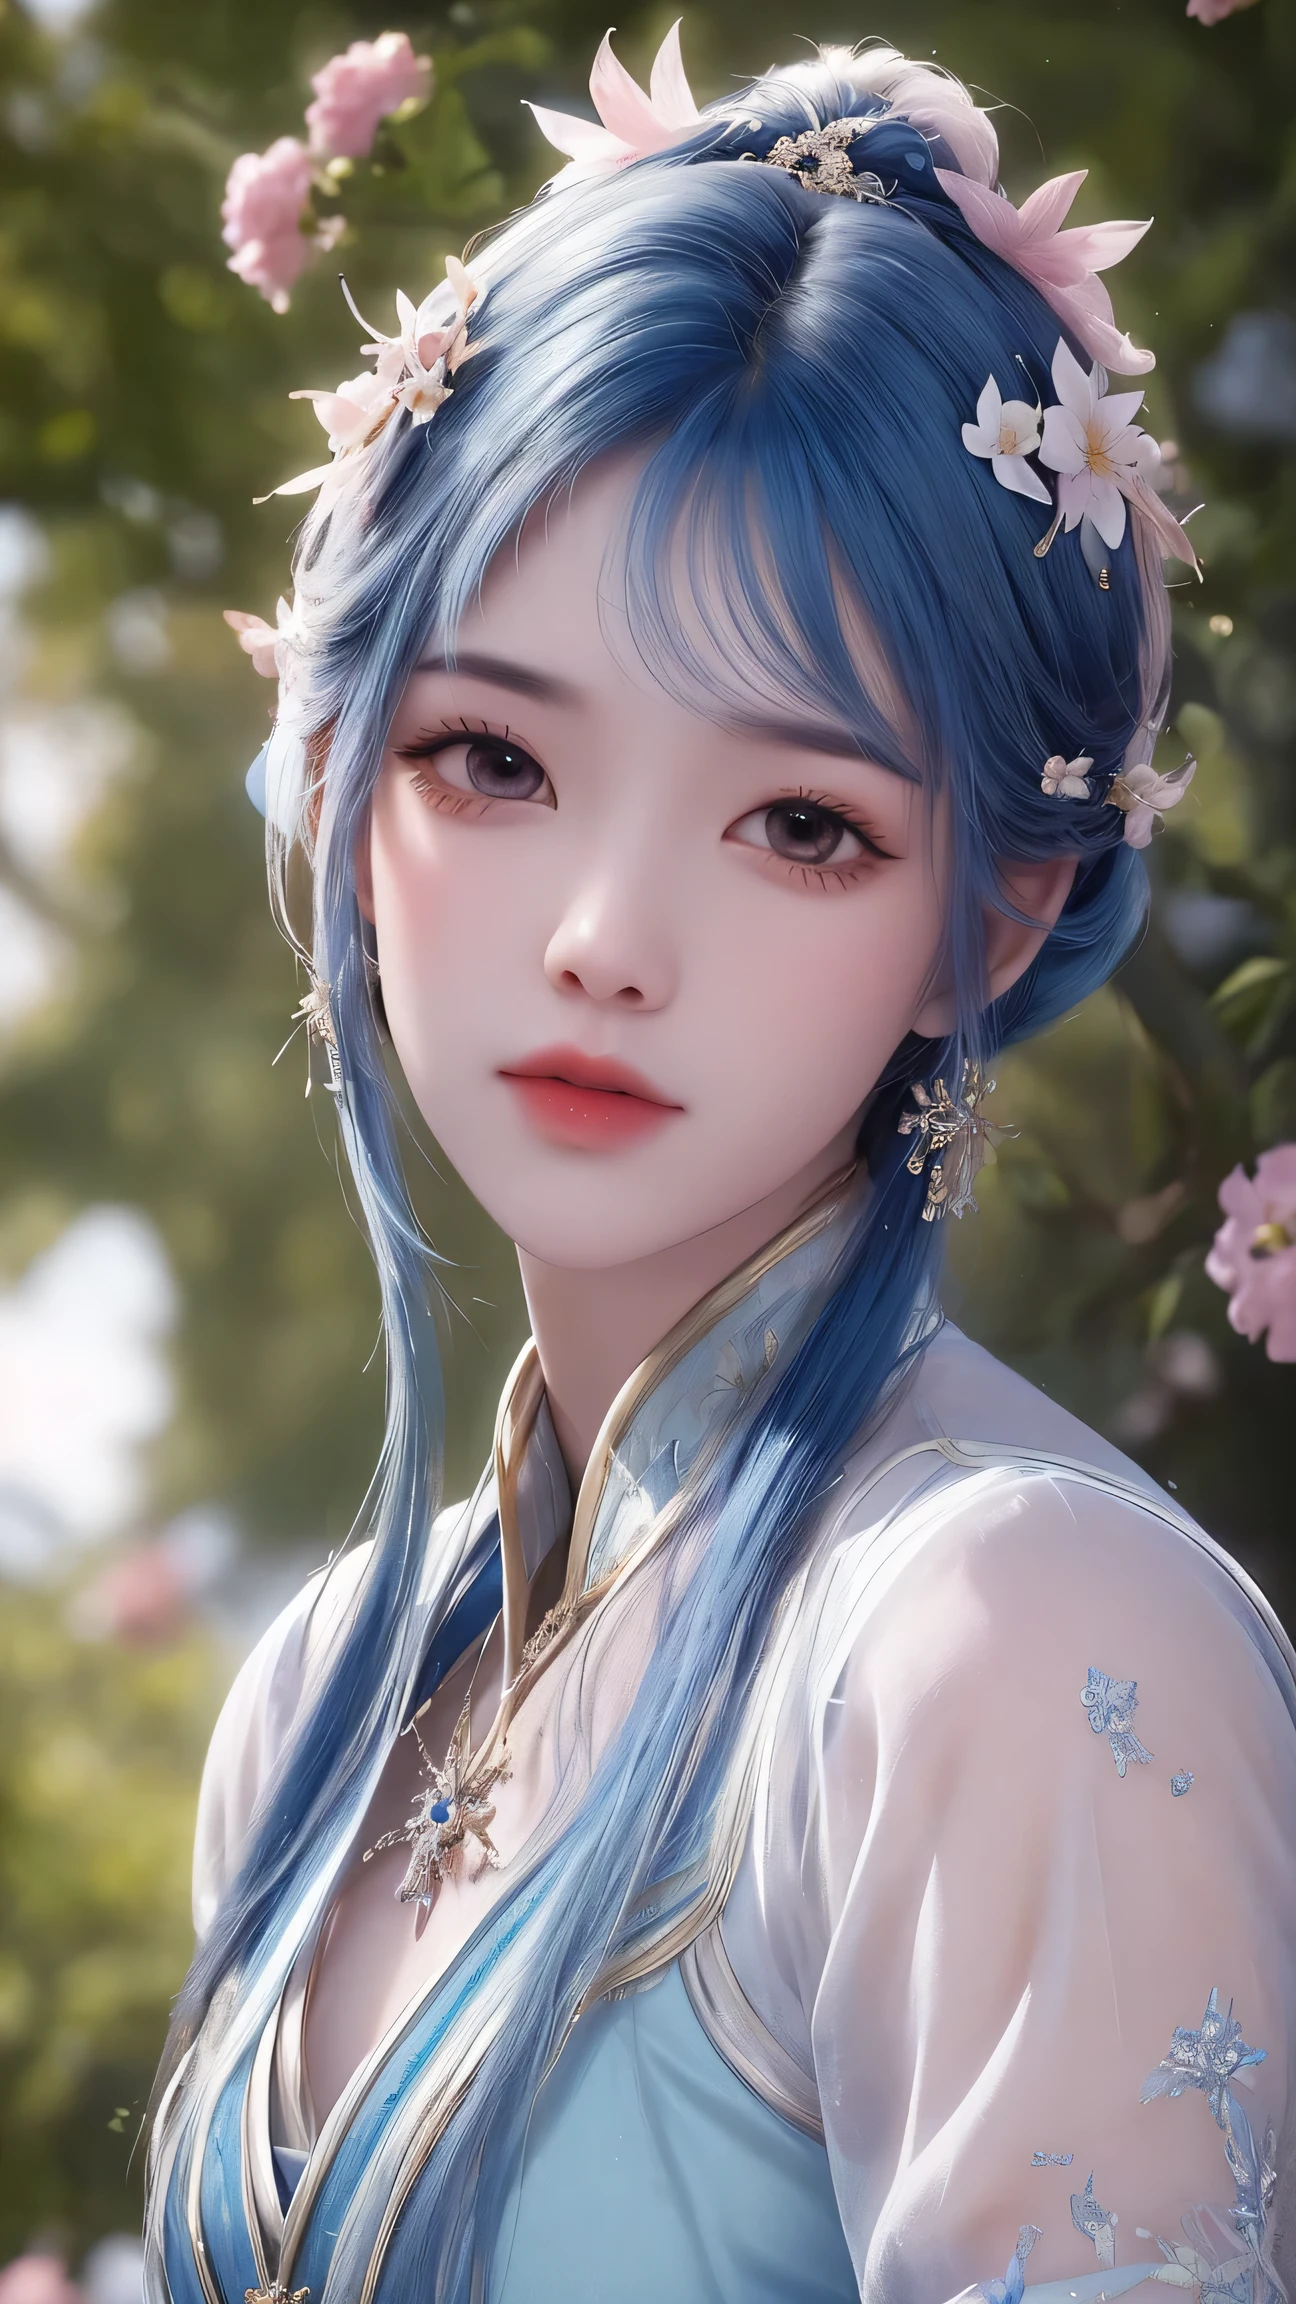 (best quality,ultra-detailed,photorealistic:1.37),vivid colors,studio lighting,beautiful detailed eyes,beautiful detailed lips,extremely detailed eyes and face,long eyelashes,portraits,blue hair,confident expression,feminine,standing in a garden,soft sunlight, scenery,flower blossoms,peaceful atmosphere,artistic touch,textured brushstrokes,subtle color variations,brilliant white highlights,delicate movements,graceful pose,slight breeze,rustling leaves,sophisticated style,professional artwork,female beauty.